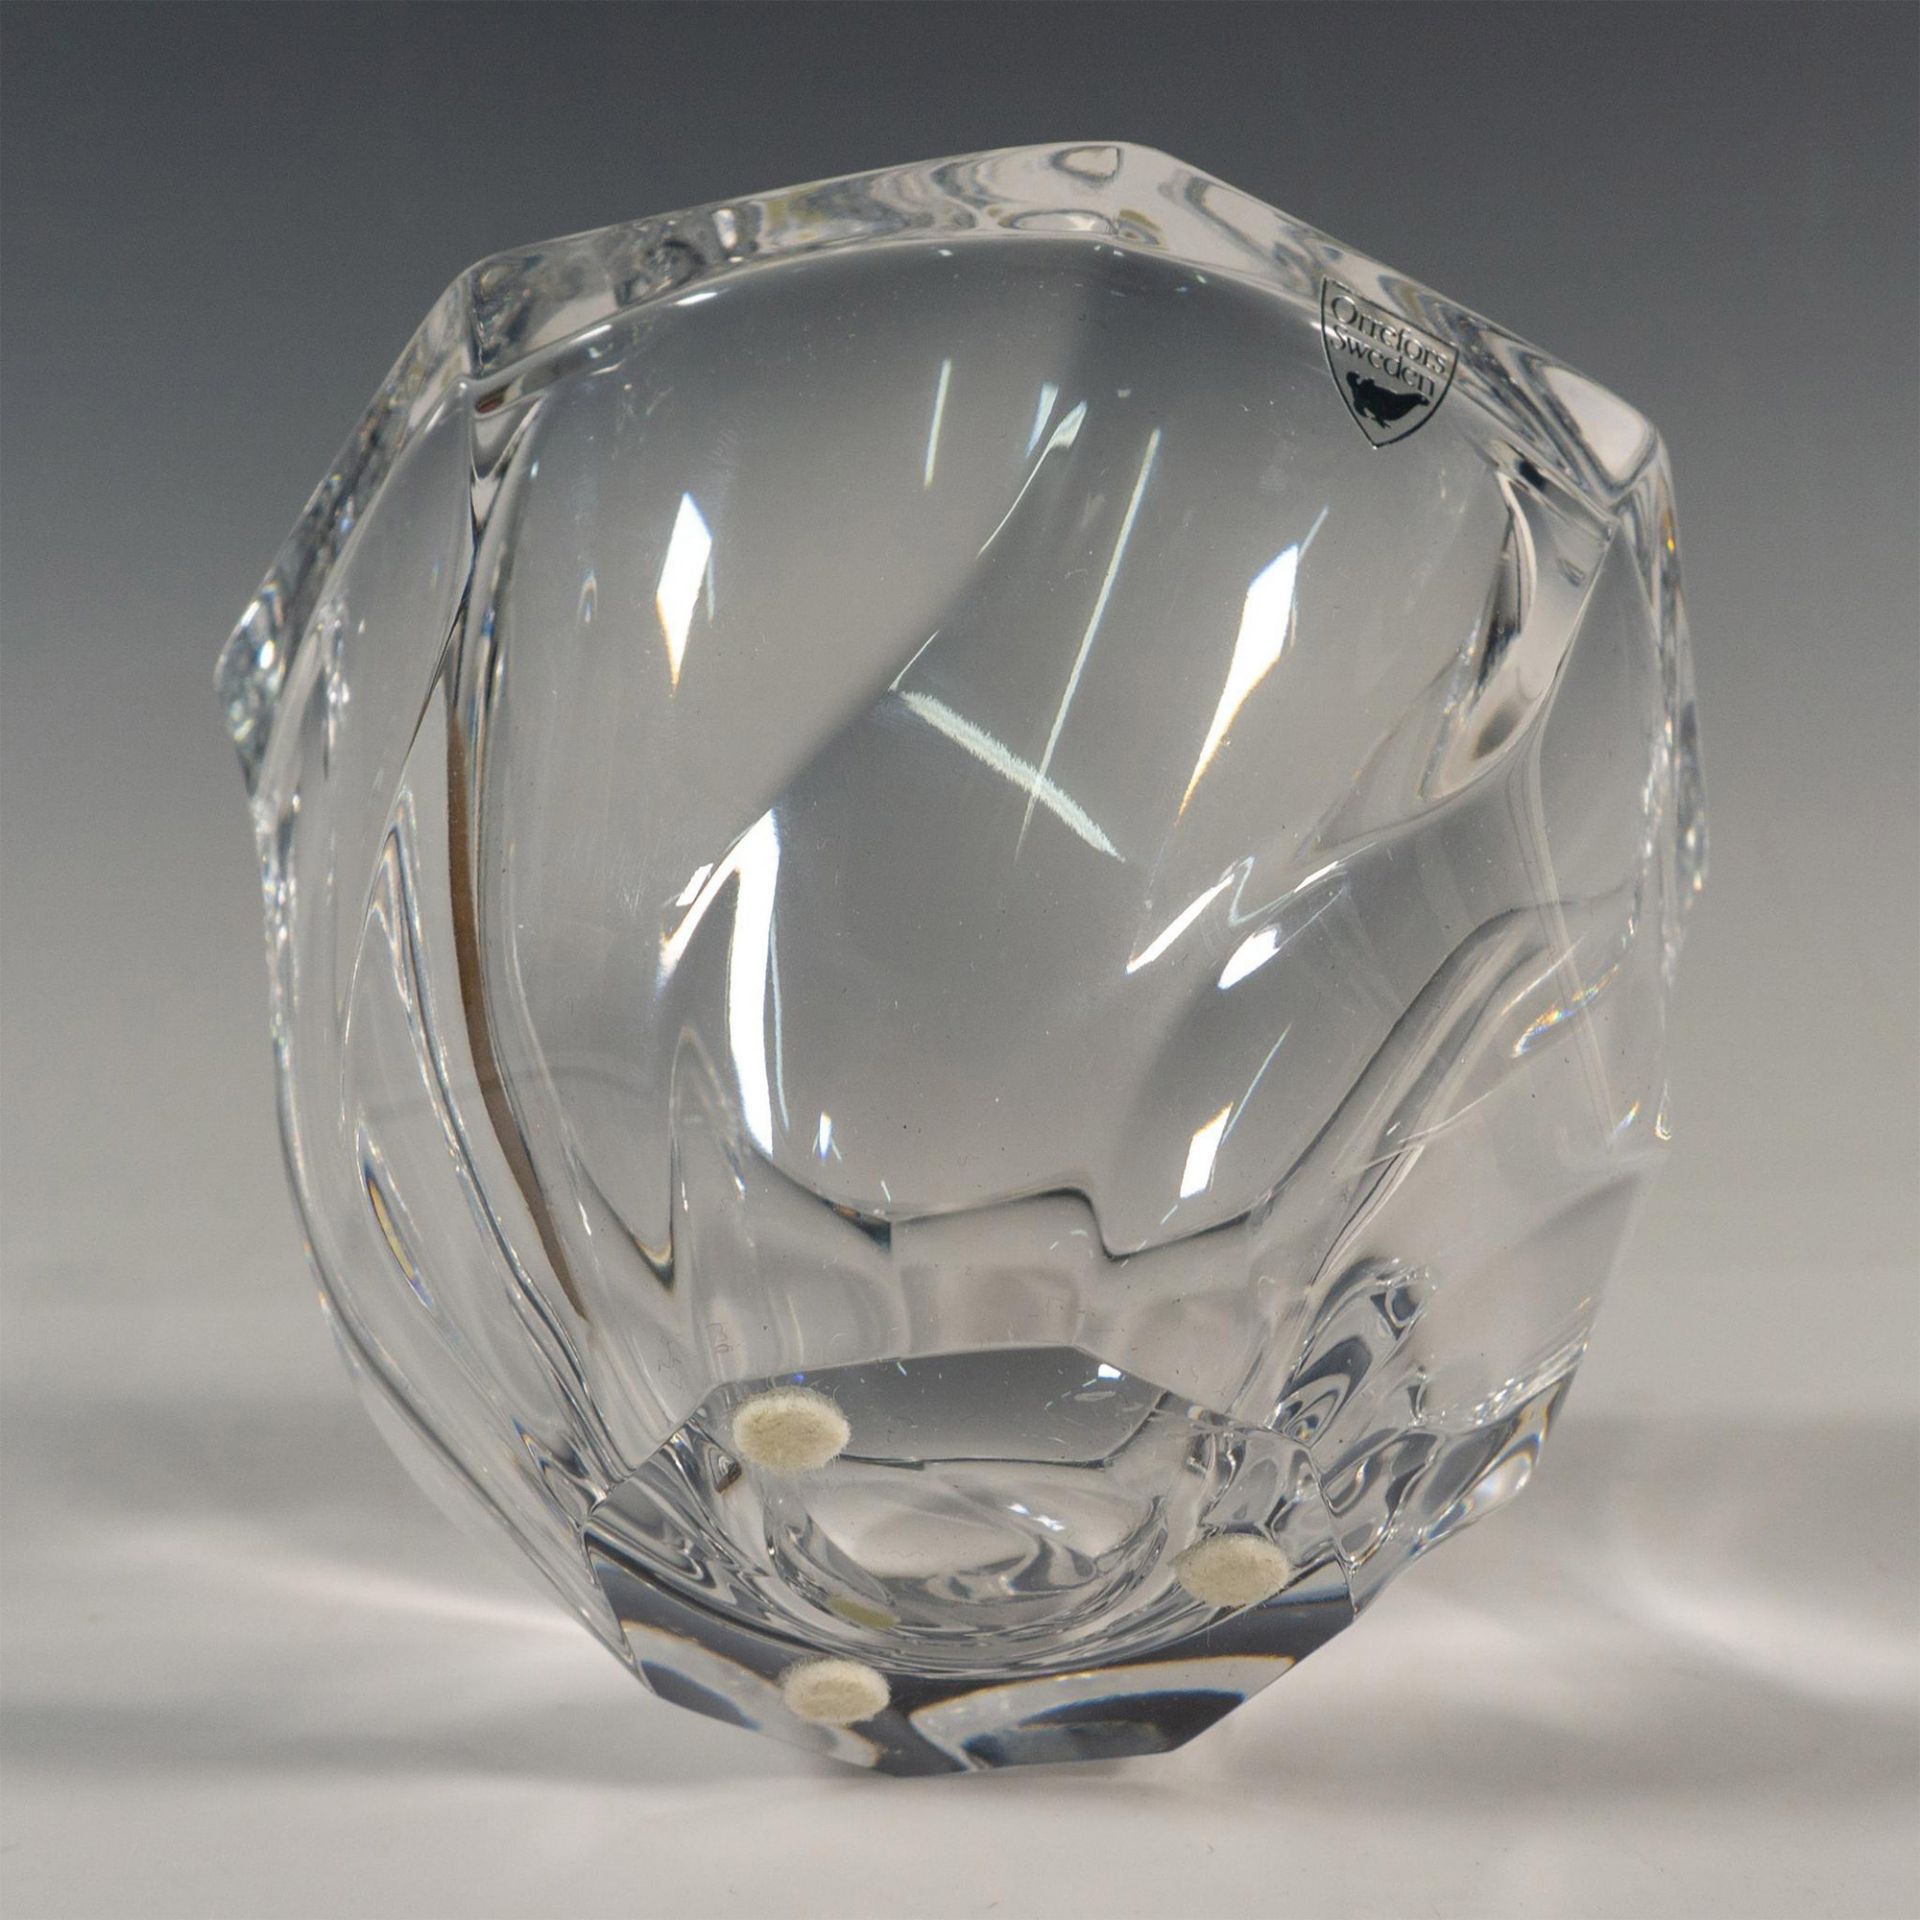 Orrefors by Olle Alberius Crystal Bowl, Residence - Image 4 of 4